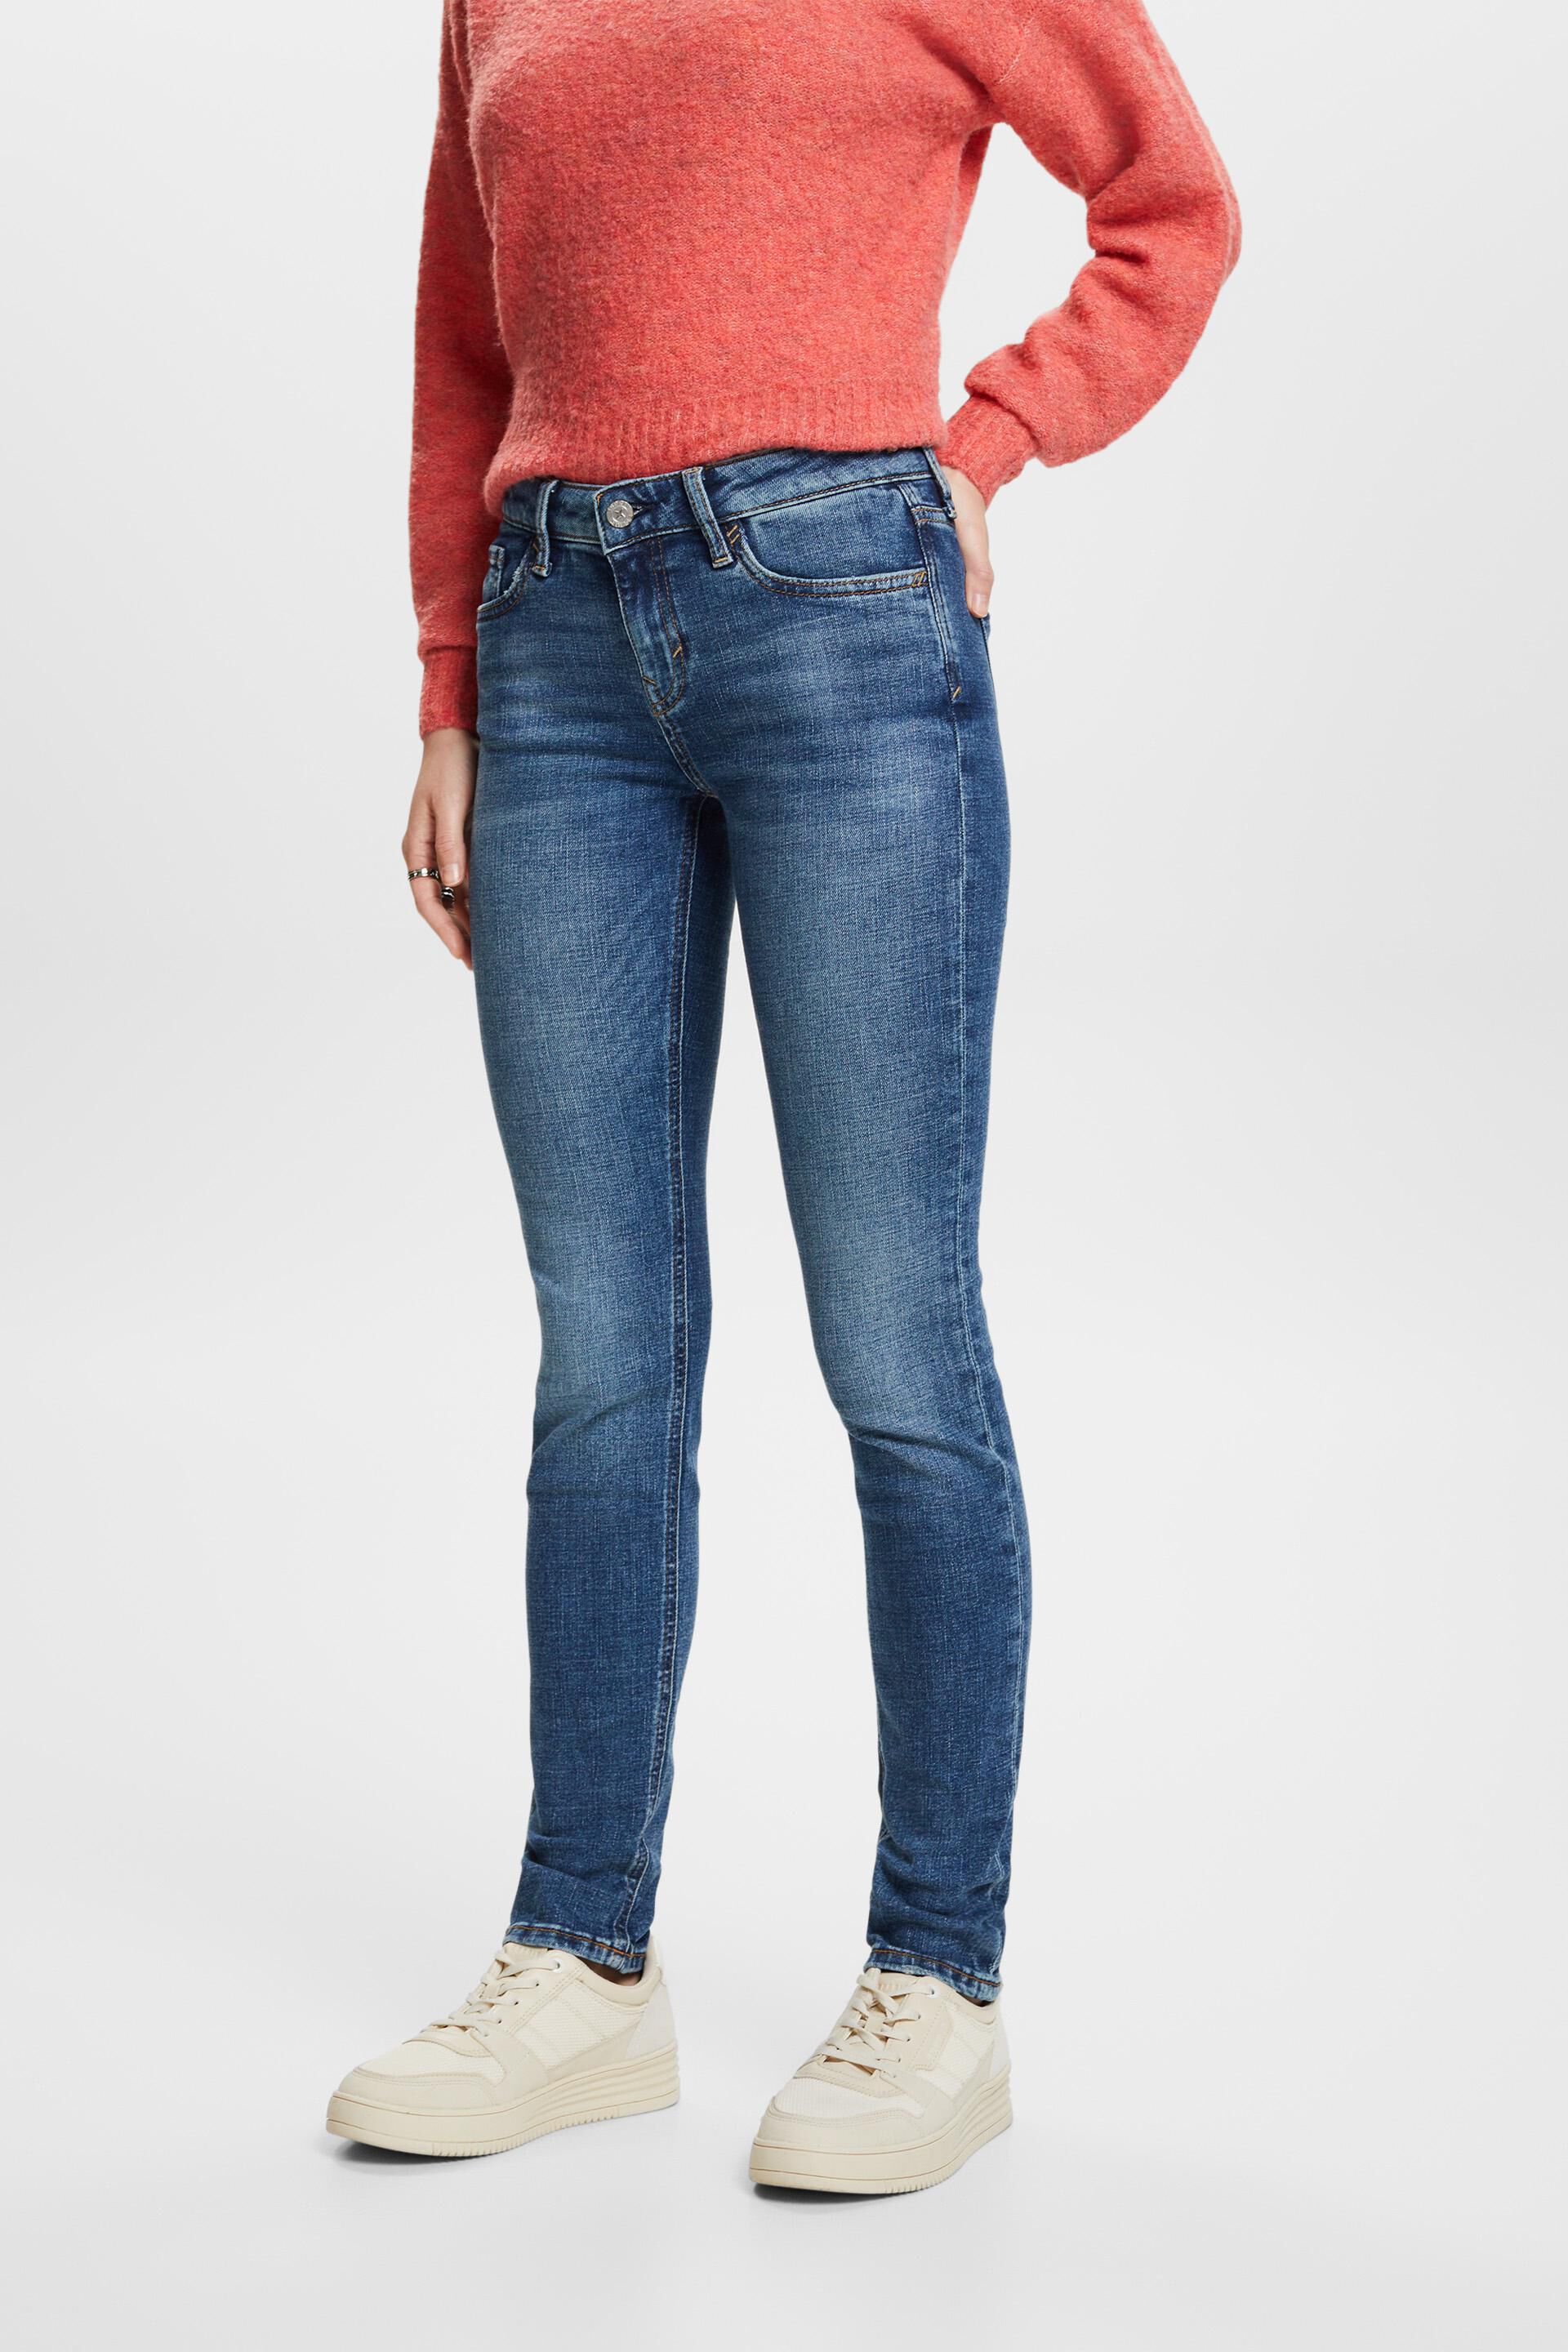 Esprit fit mid-rise Recycled: jeans stretch slim